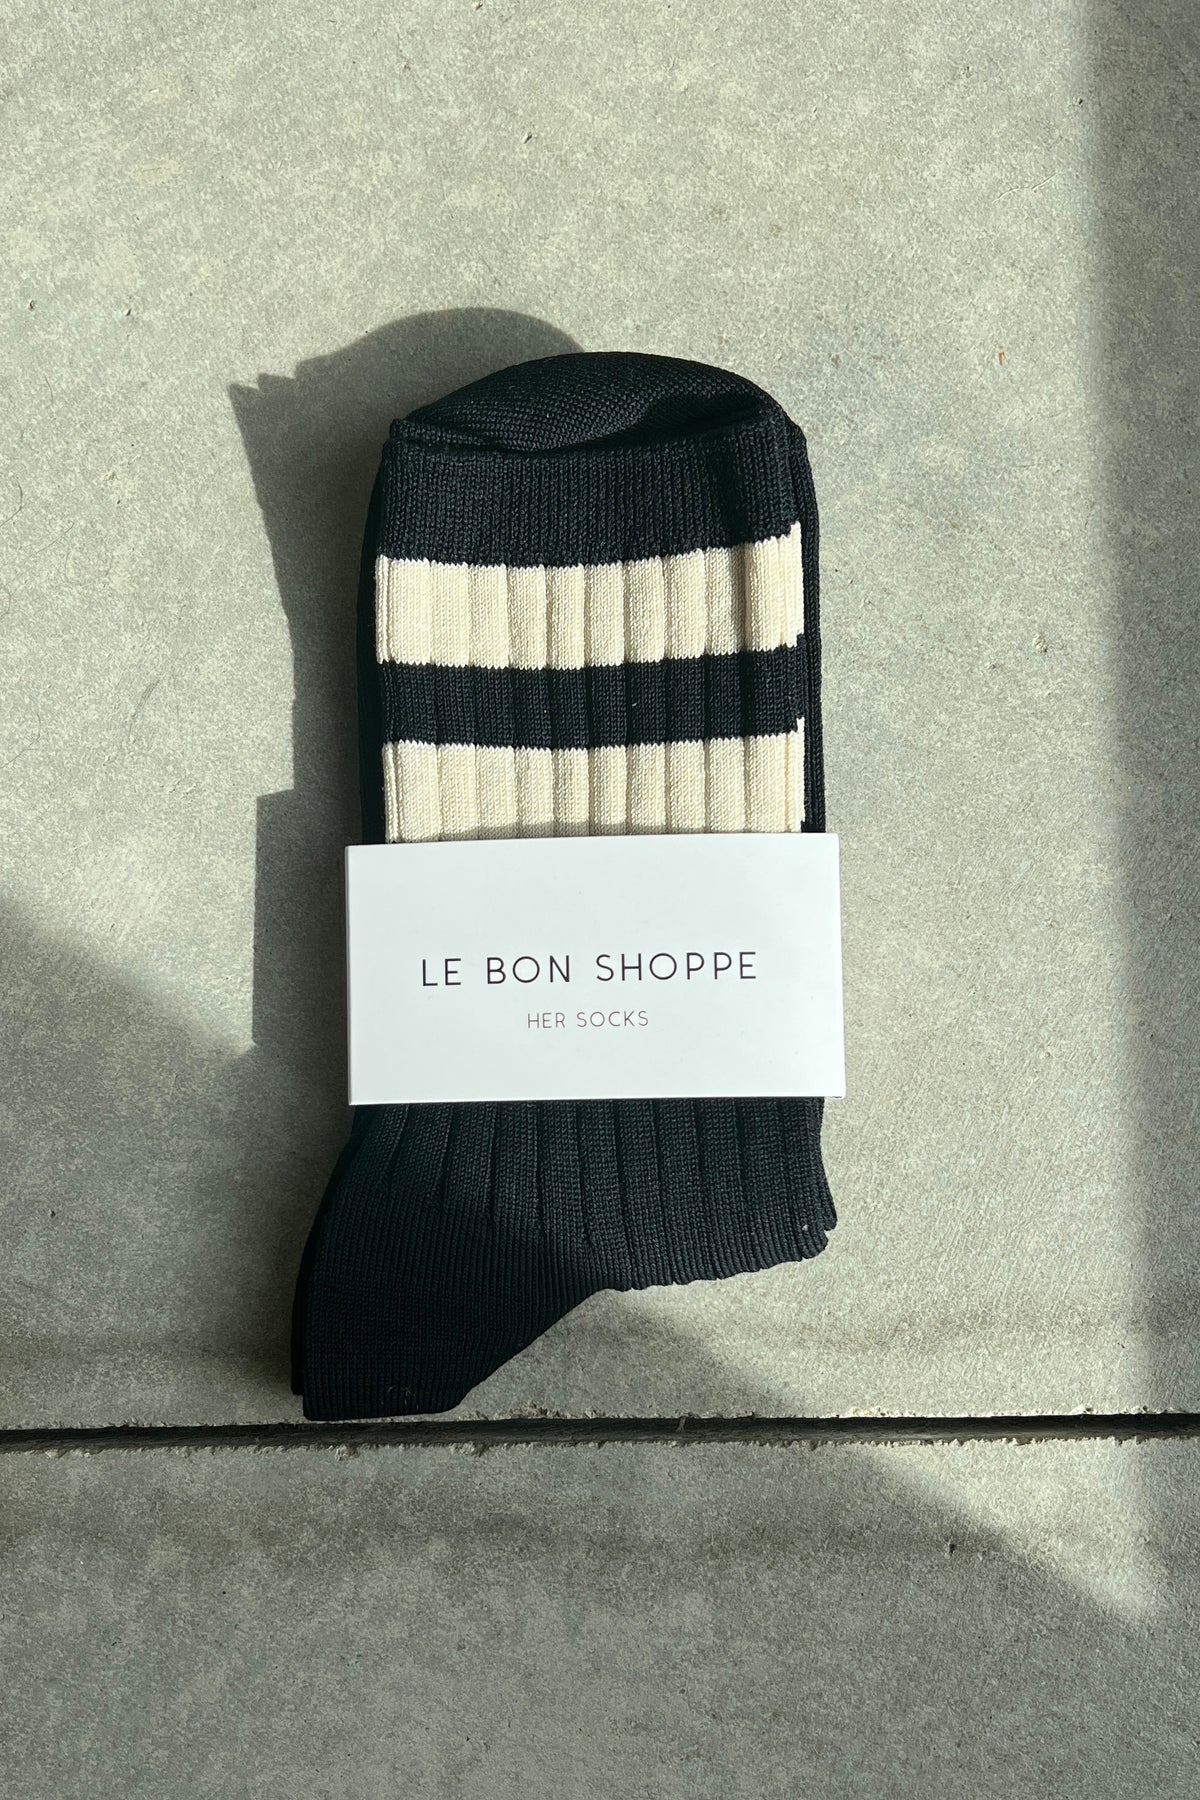 Her Varsity Socks is a varsity striped version of Le Bon's OG Her Socks which are classically ribbed, perfect height, cotton blend durable, chic go to socks. Add an understated sporty touch to any look with this bold stripe contrast version of Her Socks.